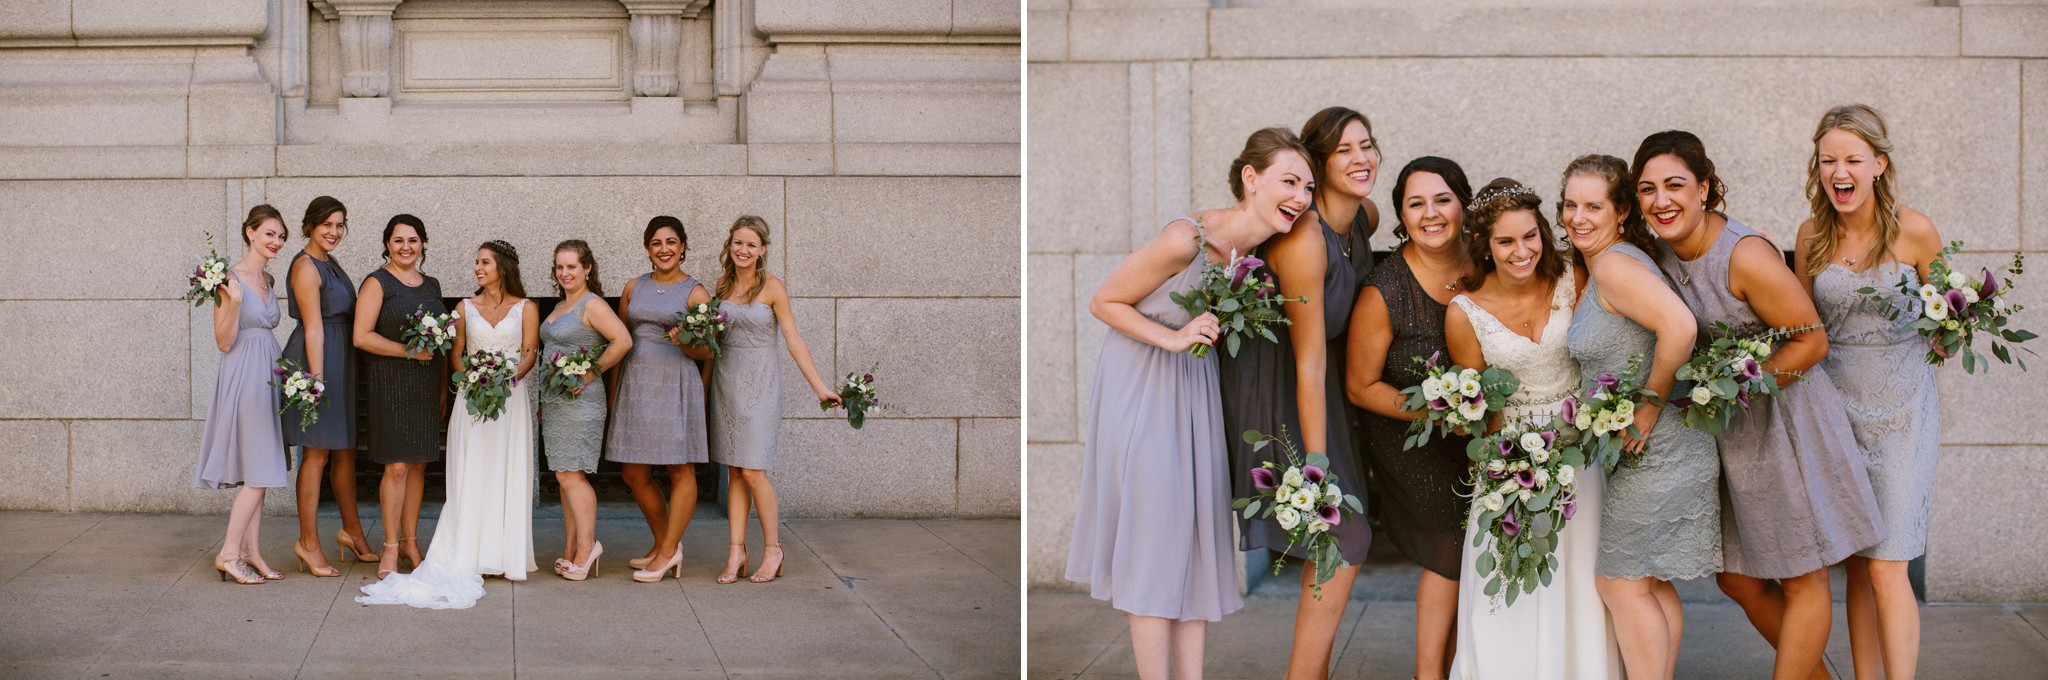 downtown-cleveland-red-space-events-wedding-photos-19